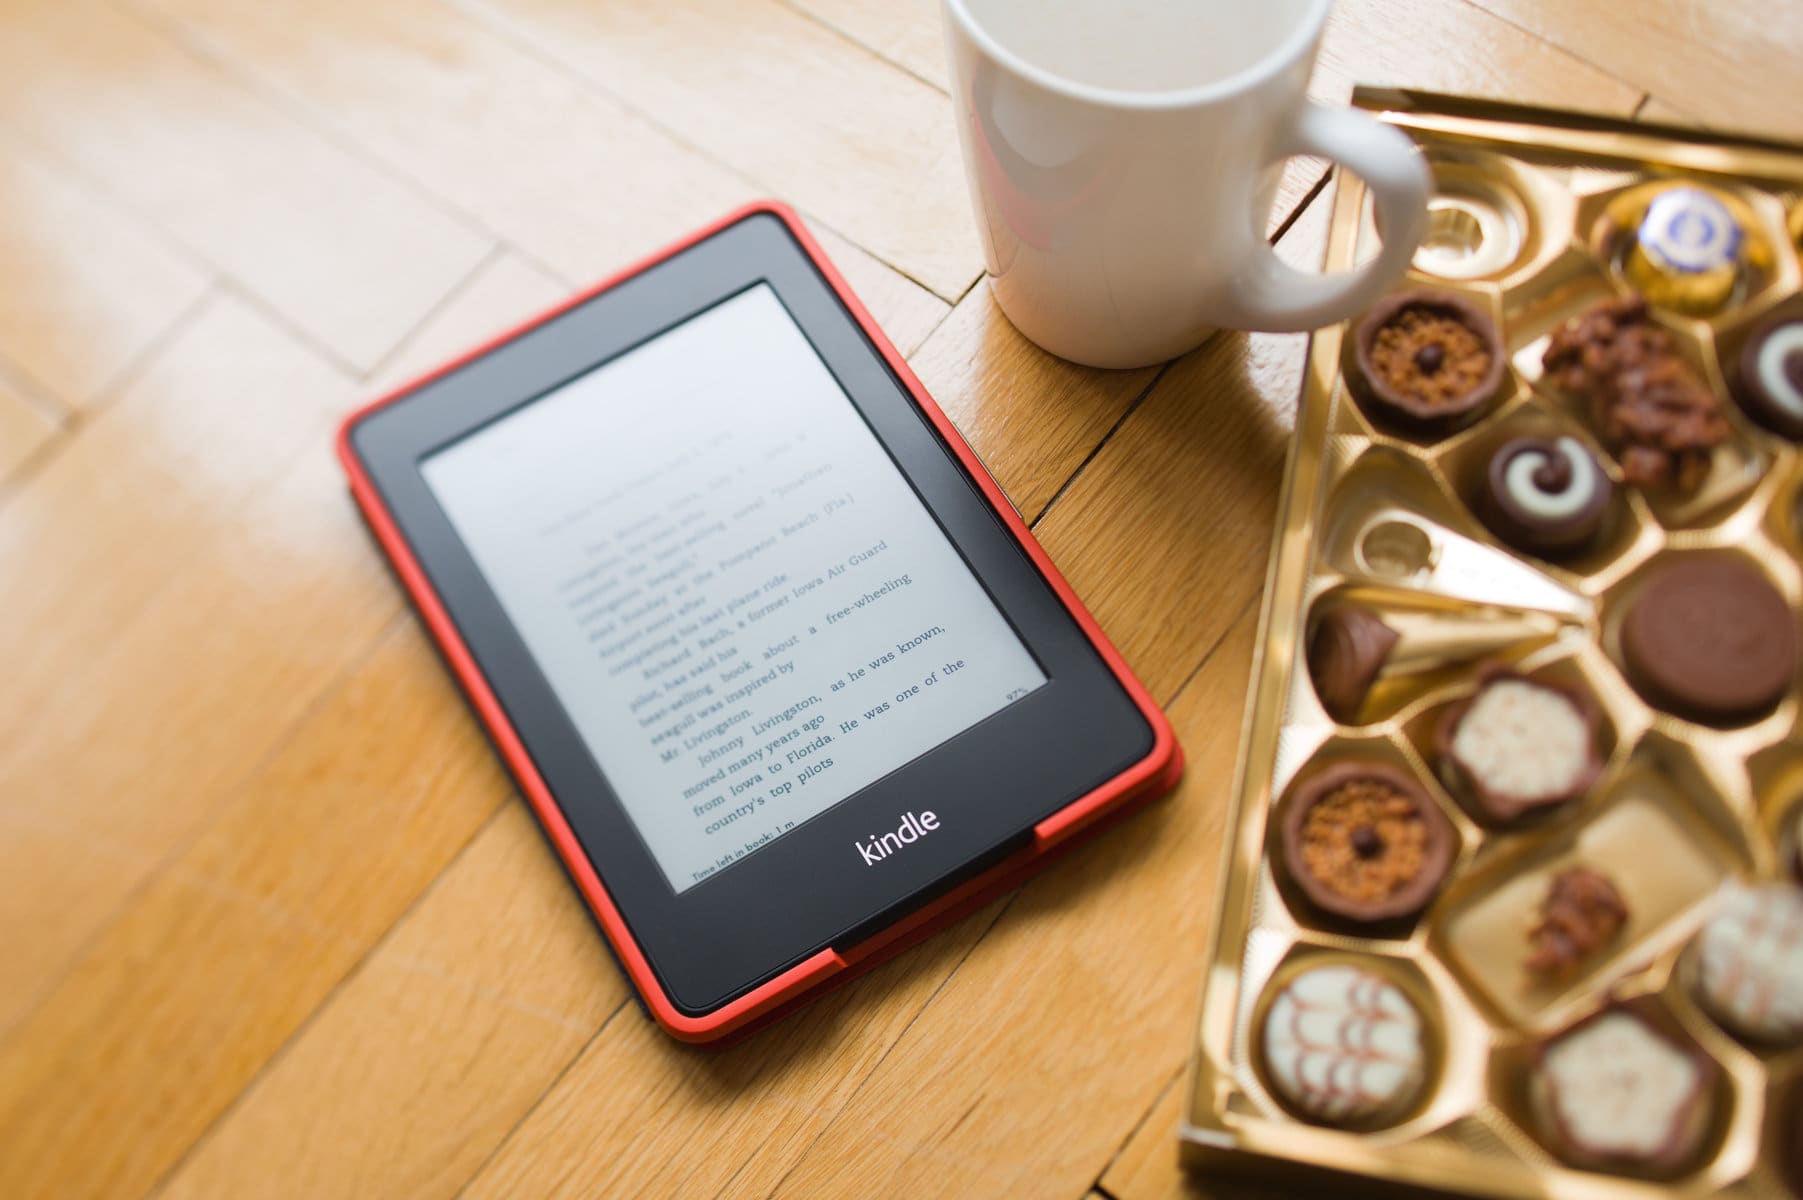 How Does Kindle Work? Getting the Most from Your Kindle